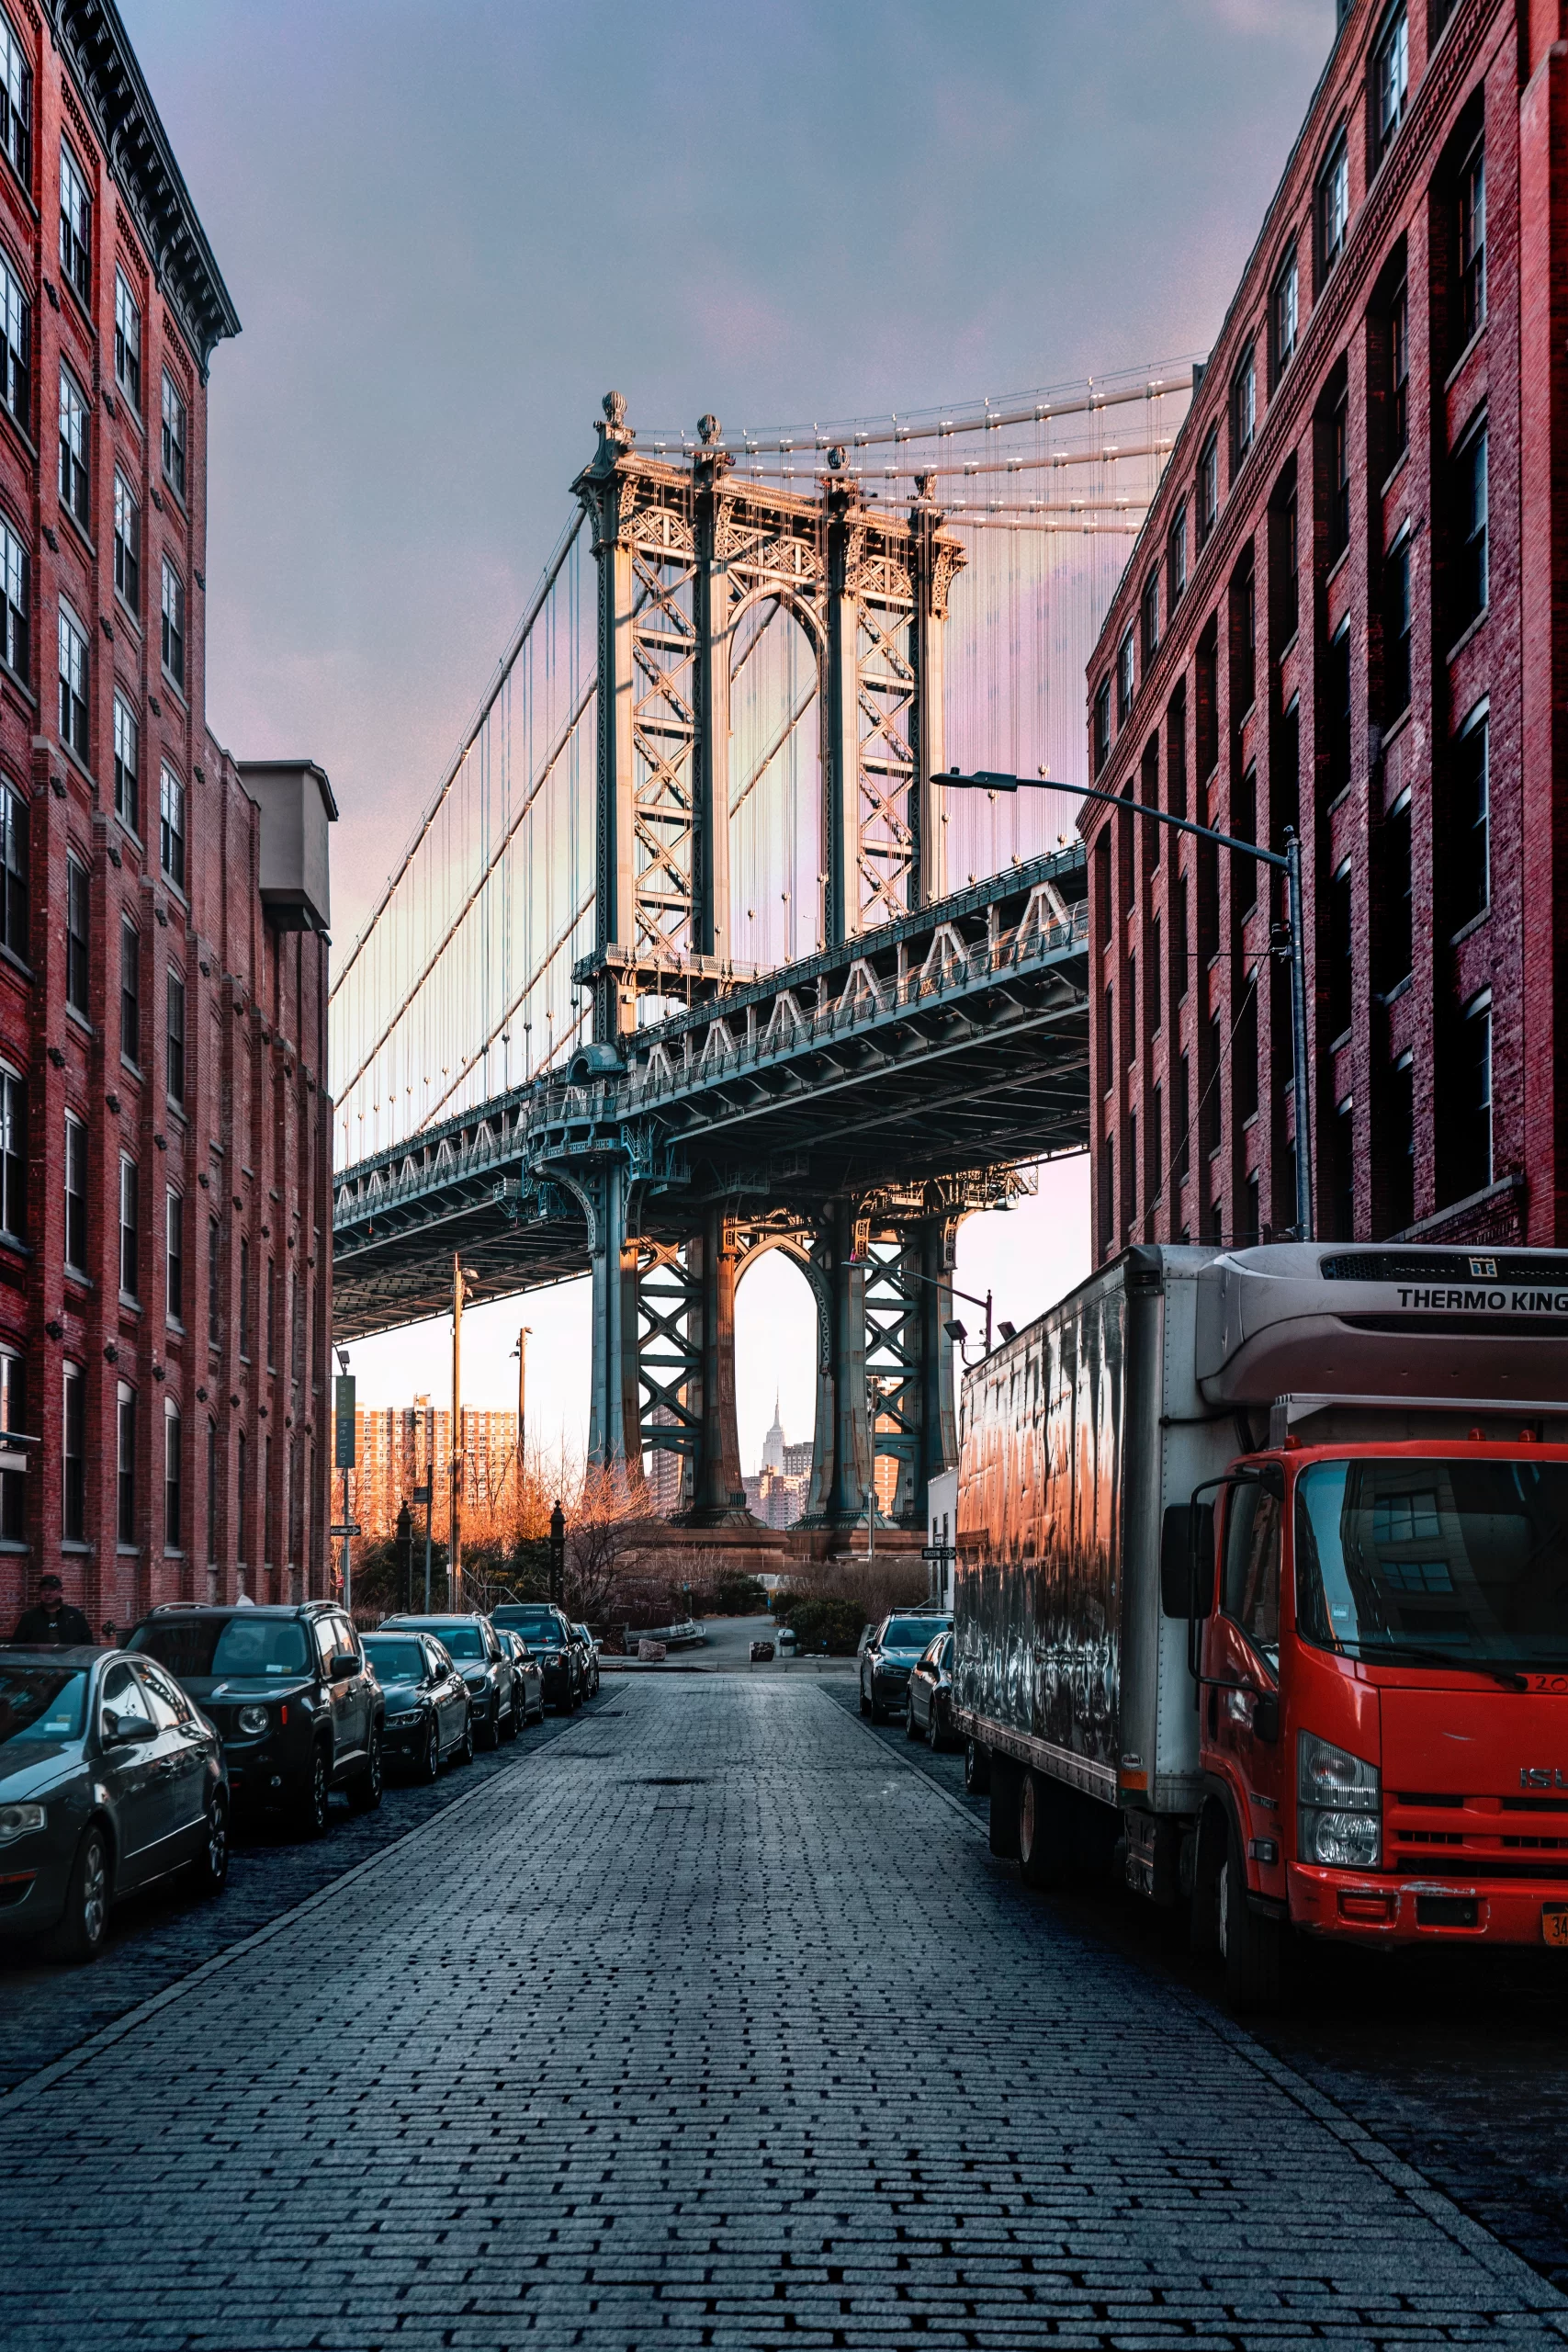 Published on February 24, 2019 SONY, ILCE-7RM3 Free to use under the Unsplash License I couldn’t come to Brooklyn with visiting this iconic spot. Lucky for my I have this bright truck to add character.